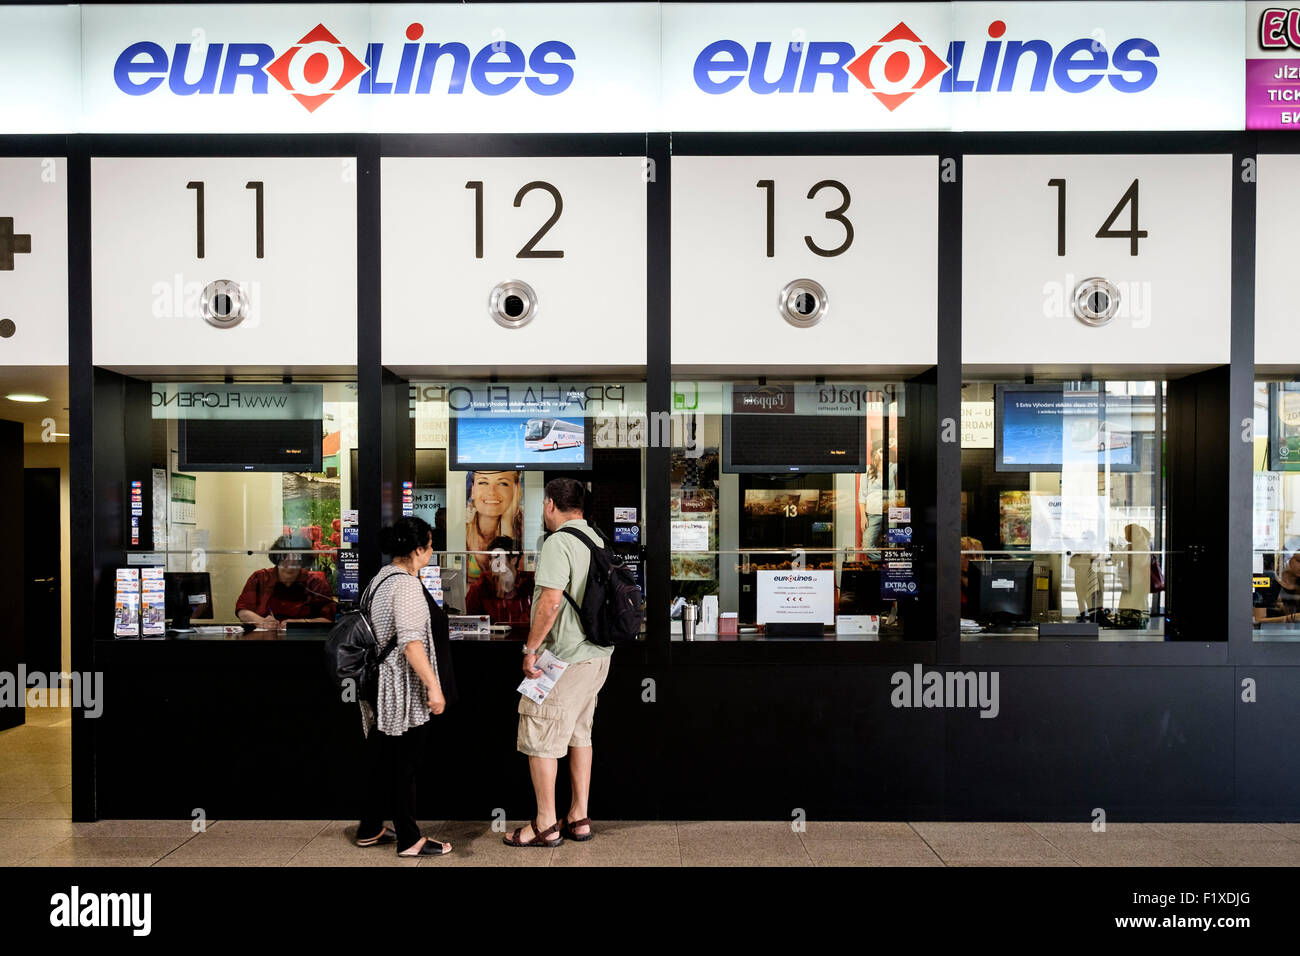 Eurolines bus company sales counters at the Florenc bus station in Prague, Czech Republic Stock Photo